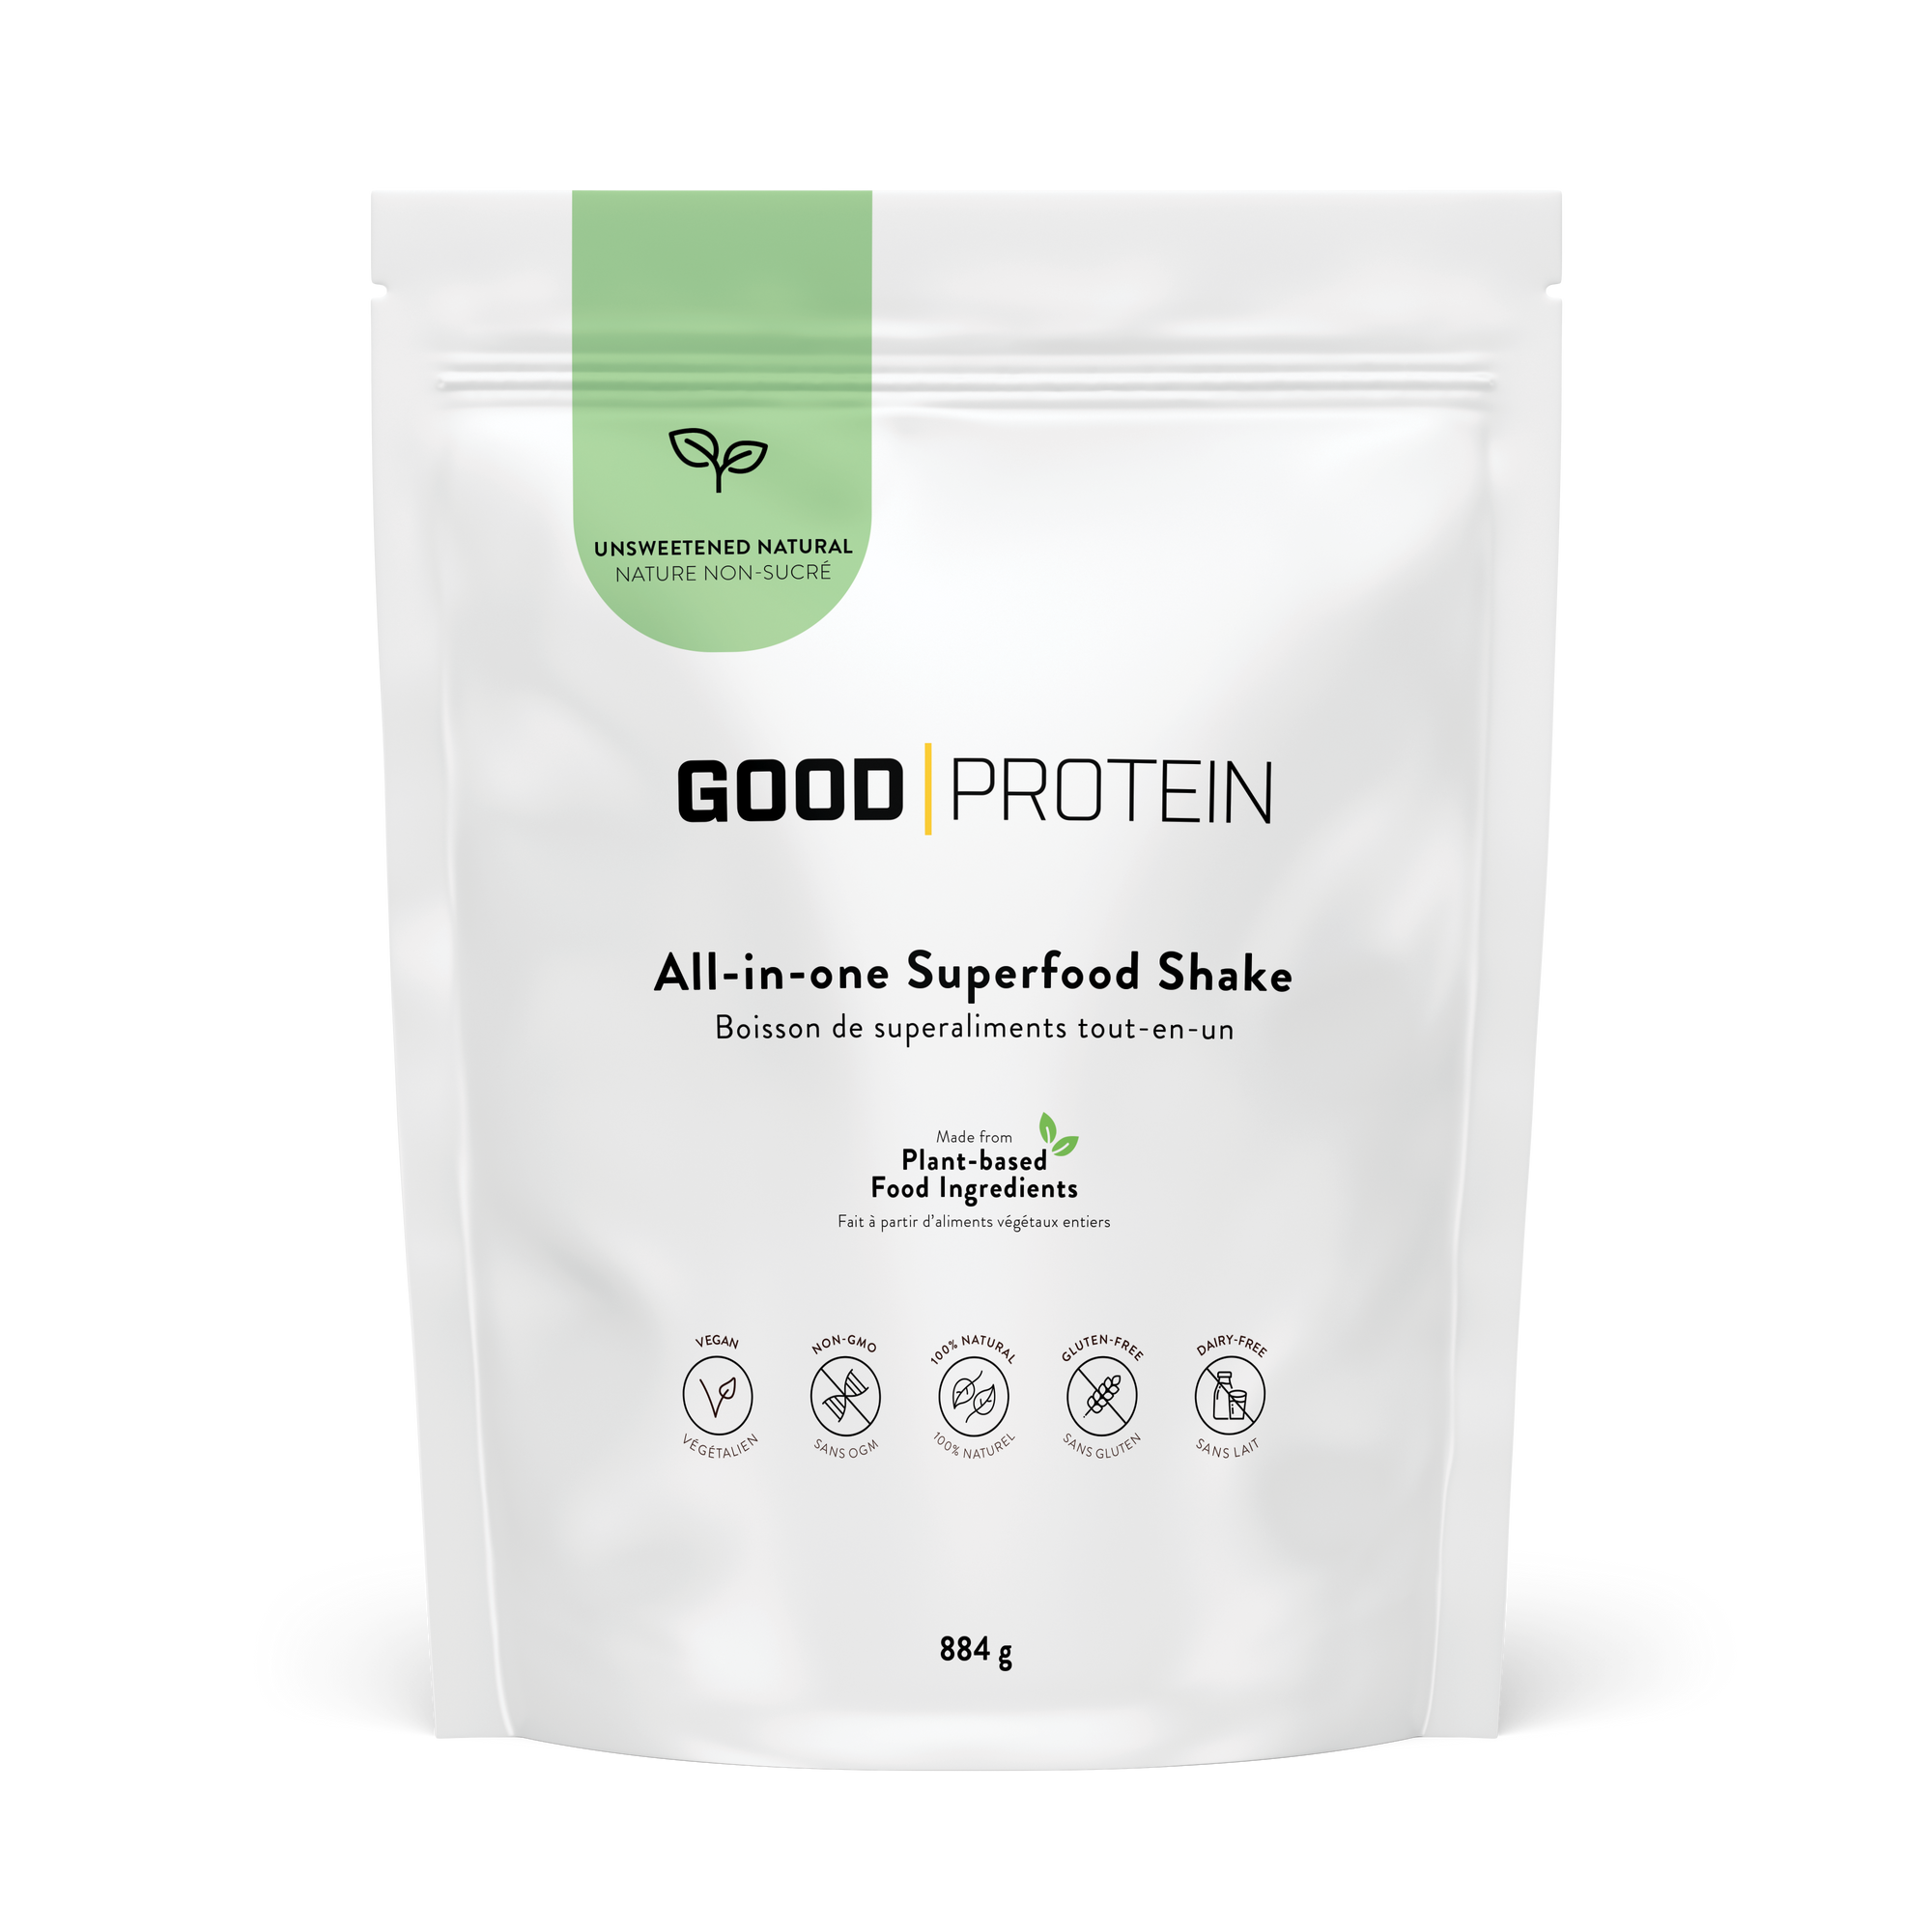 All-in-One Superfood Shake - Unsweetened Natural